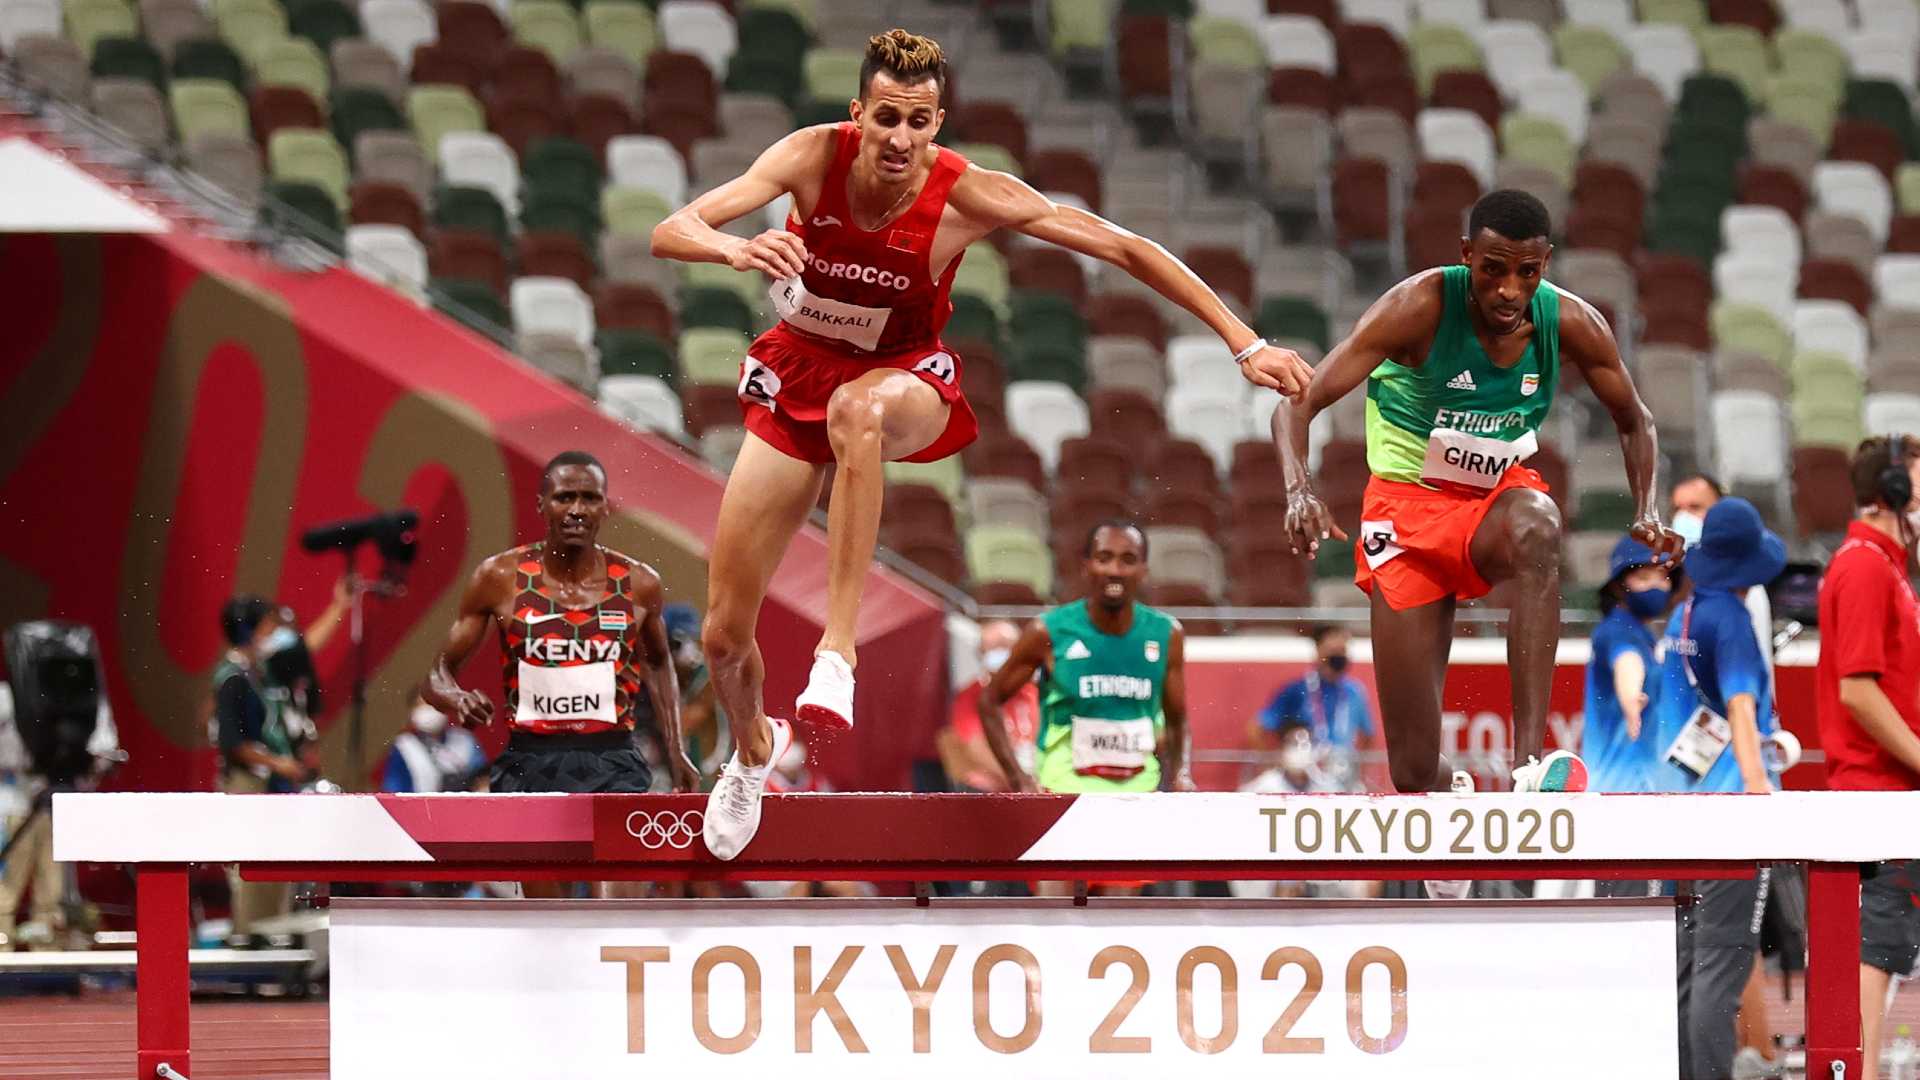 Soufiane El Bakkali in action at the Tokyo Olympics 2020 (Image Credits - Twitter)